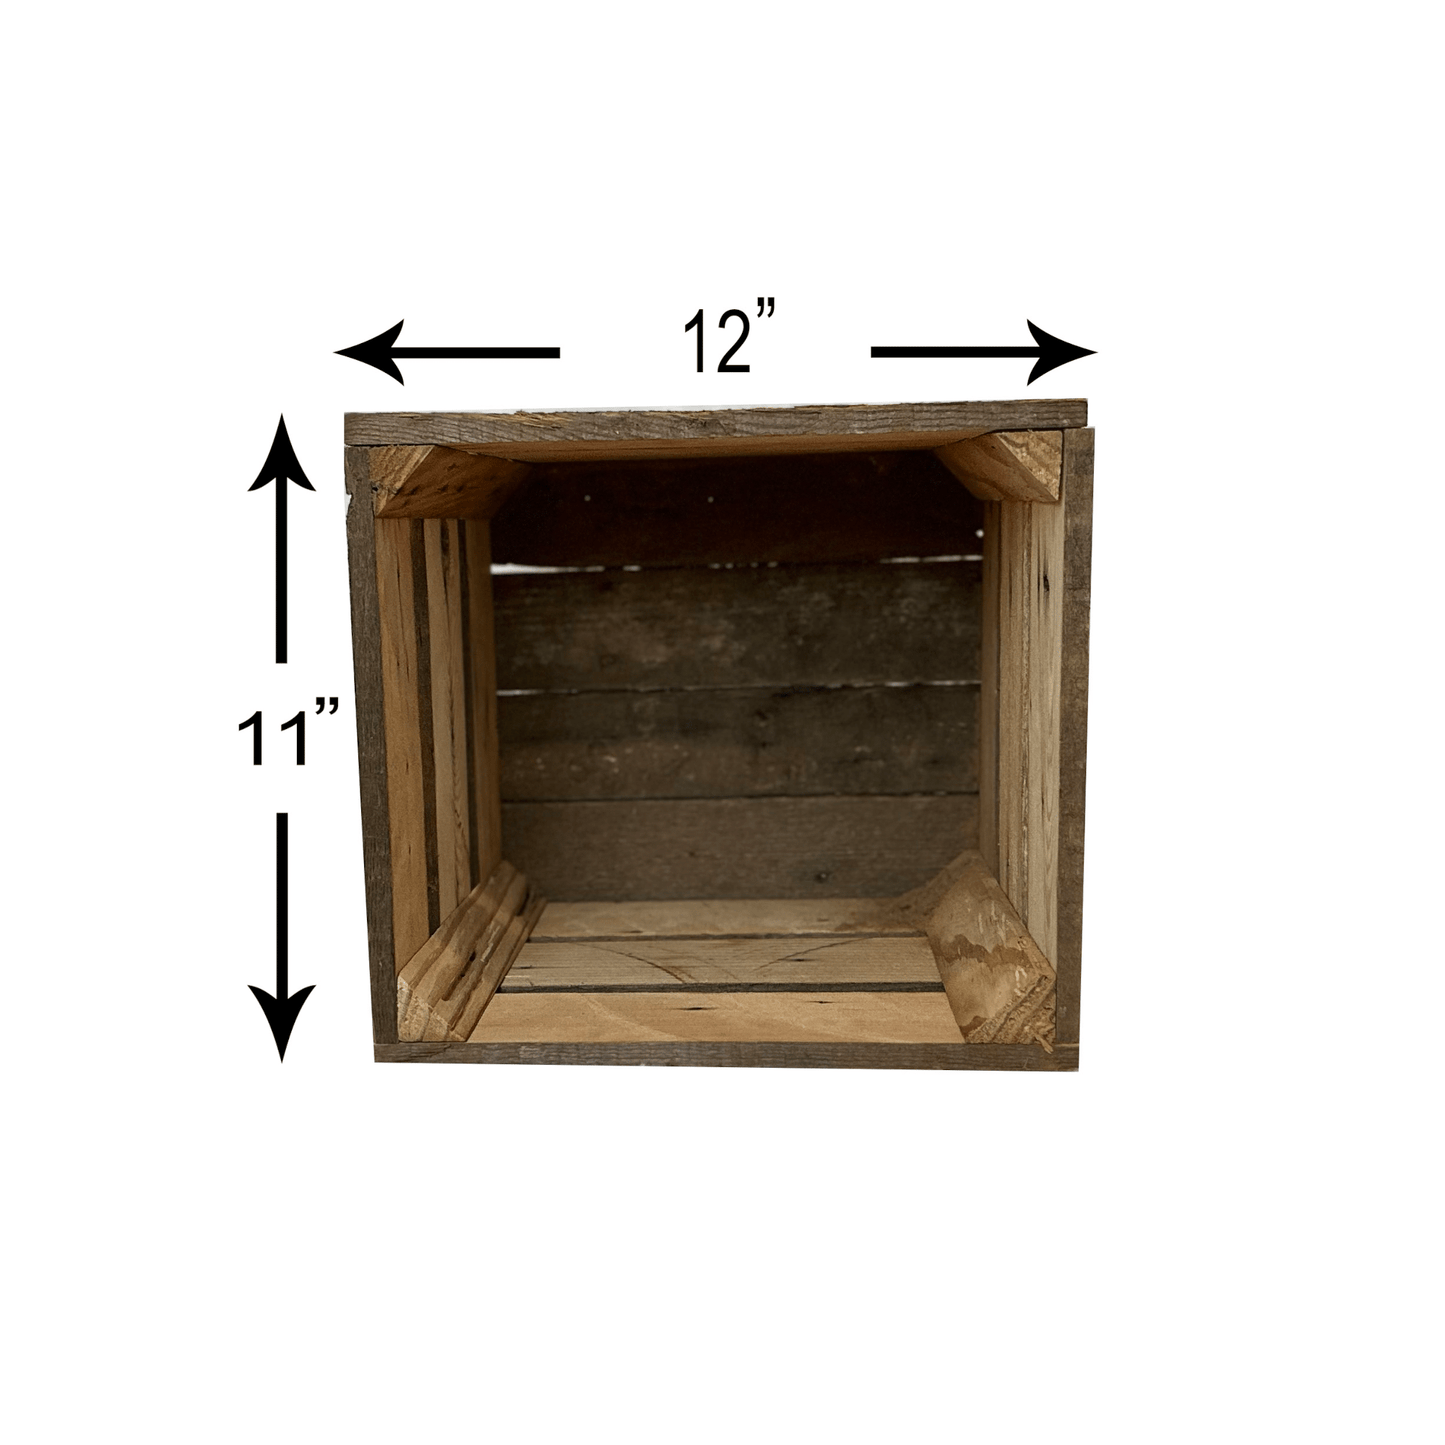 inside of the reclaimed wood crate showing corner supports and variance in wood. There are four slats across the bottom with a small space in between. Text reads twelve inches wide by eleven inches long.